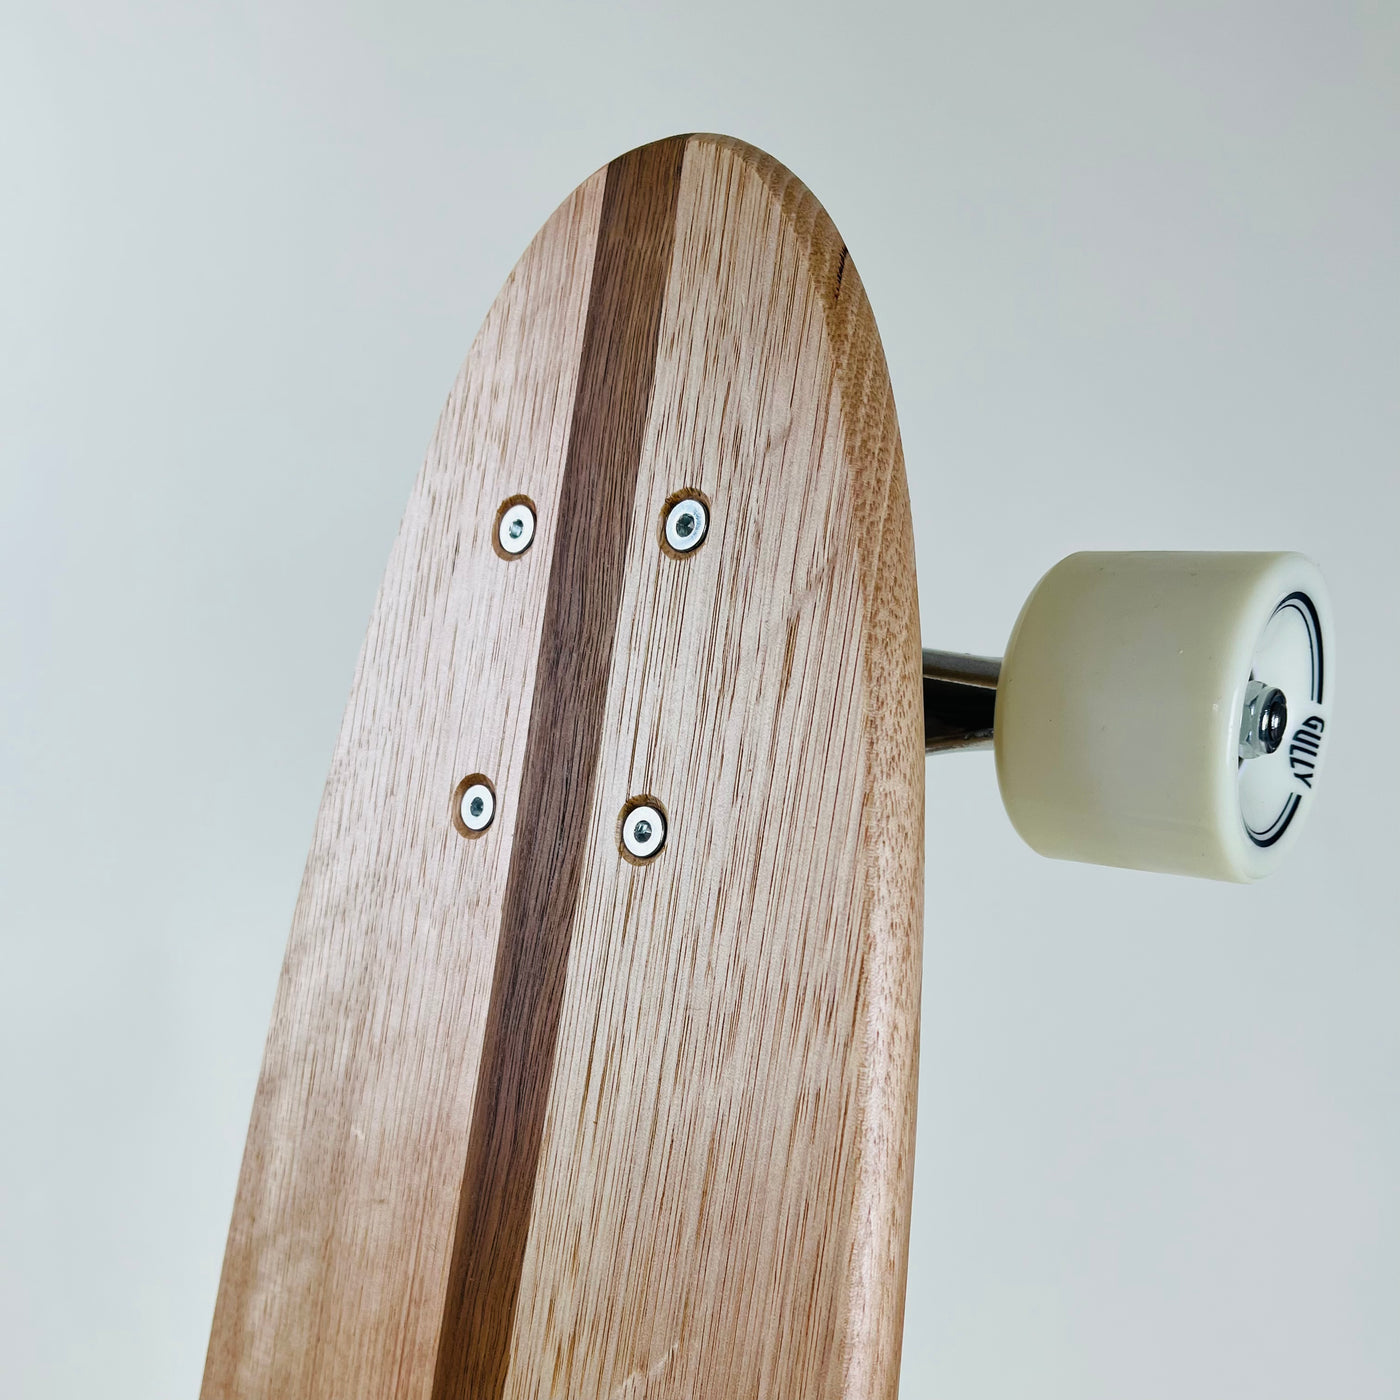 Vic Ash & Spotted Gum Cruiser Skateboard  - Small V Tail